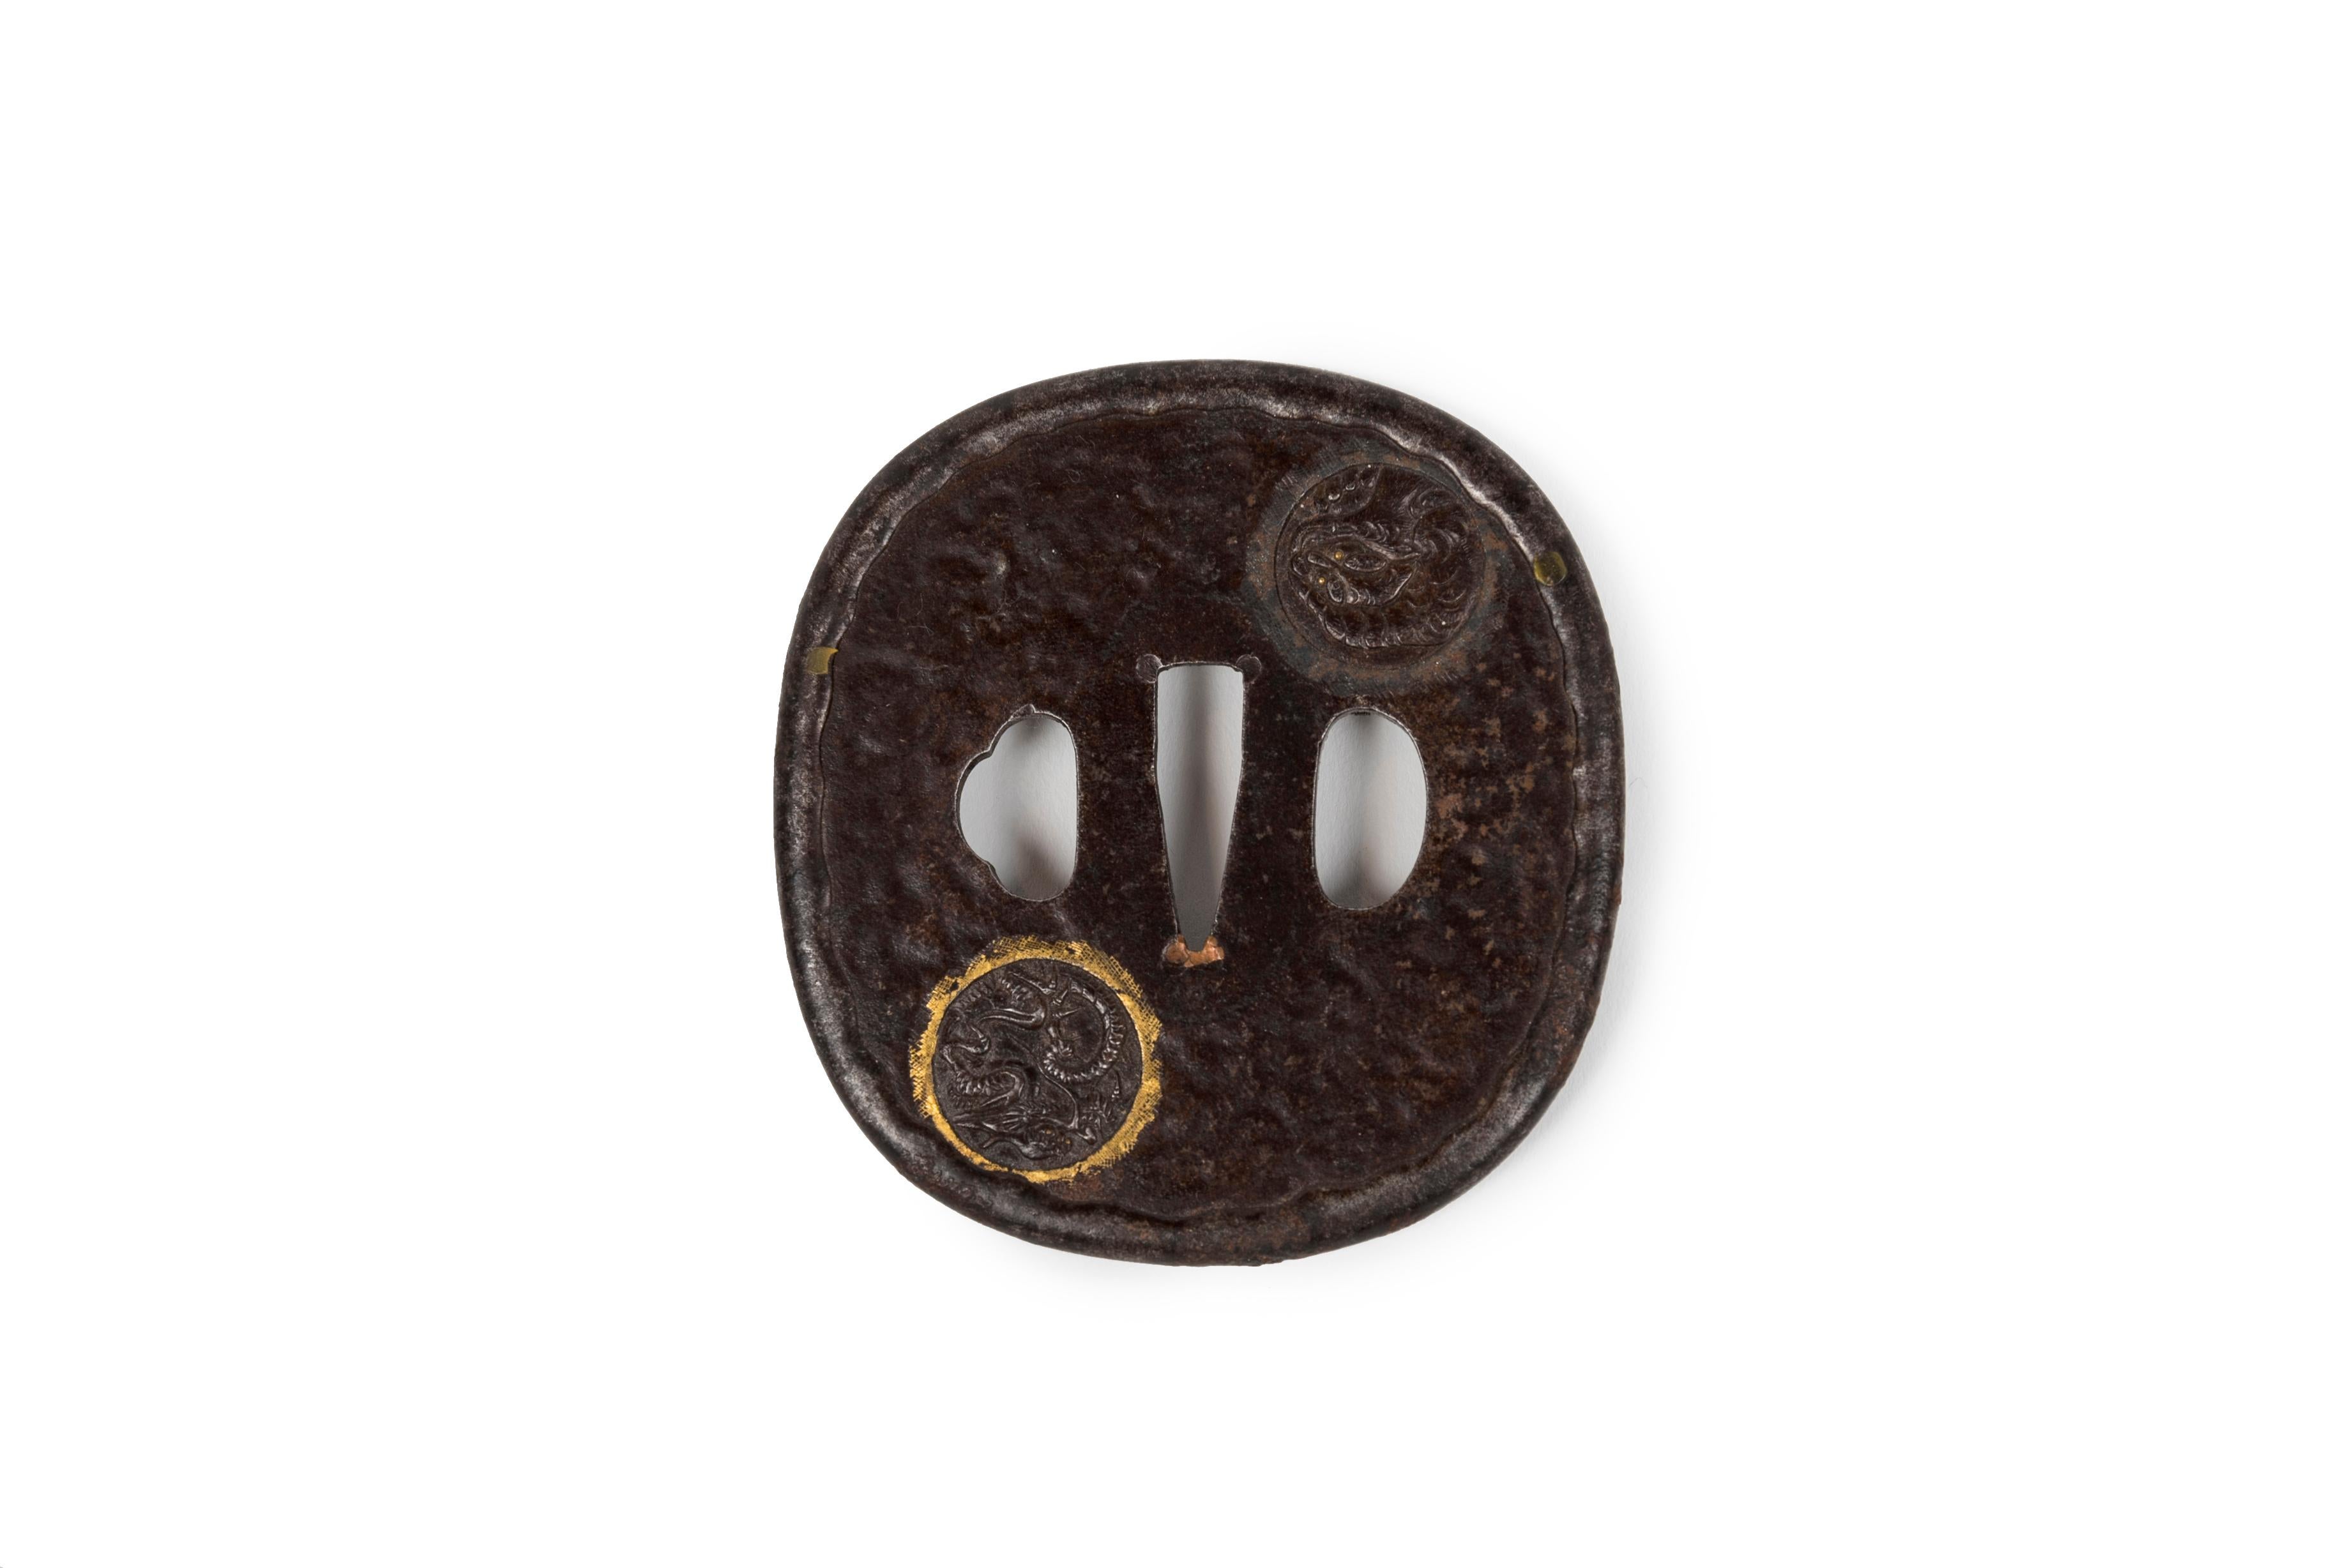 Ovoid-shaped (nagamarugata) iron tsuba hammered and chased with medallions. On one side, medallions of a dragon with gold highlights and a komainu (or shishi – lion dog guarding the temple). On the other one, a medallion of waves and clouds with